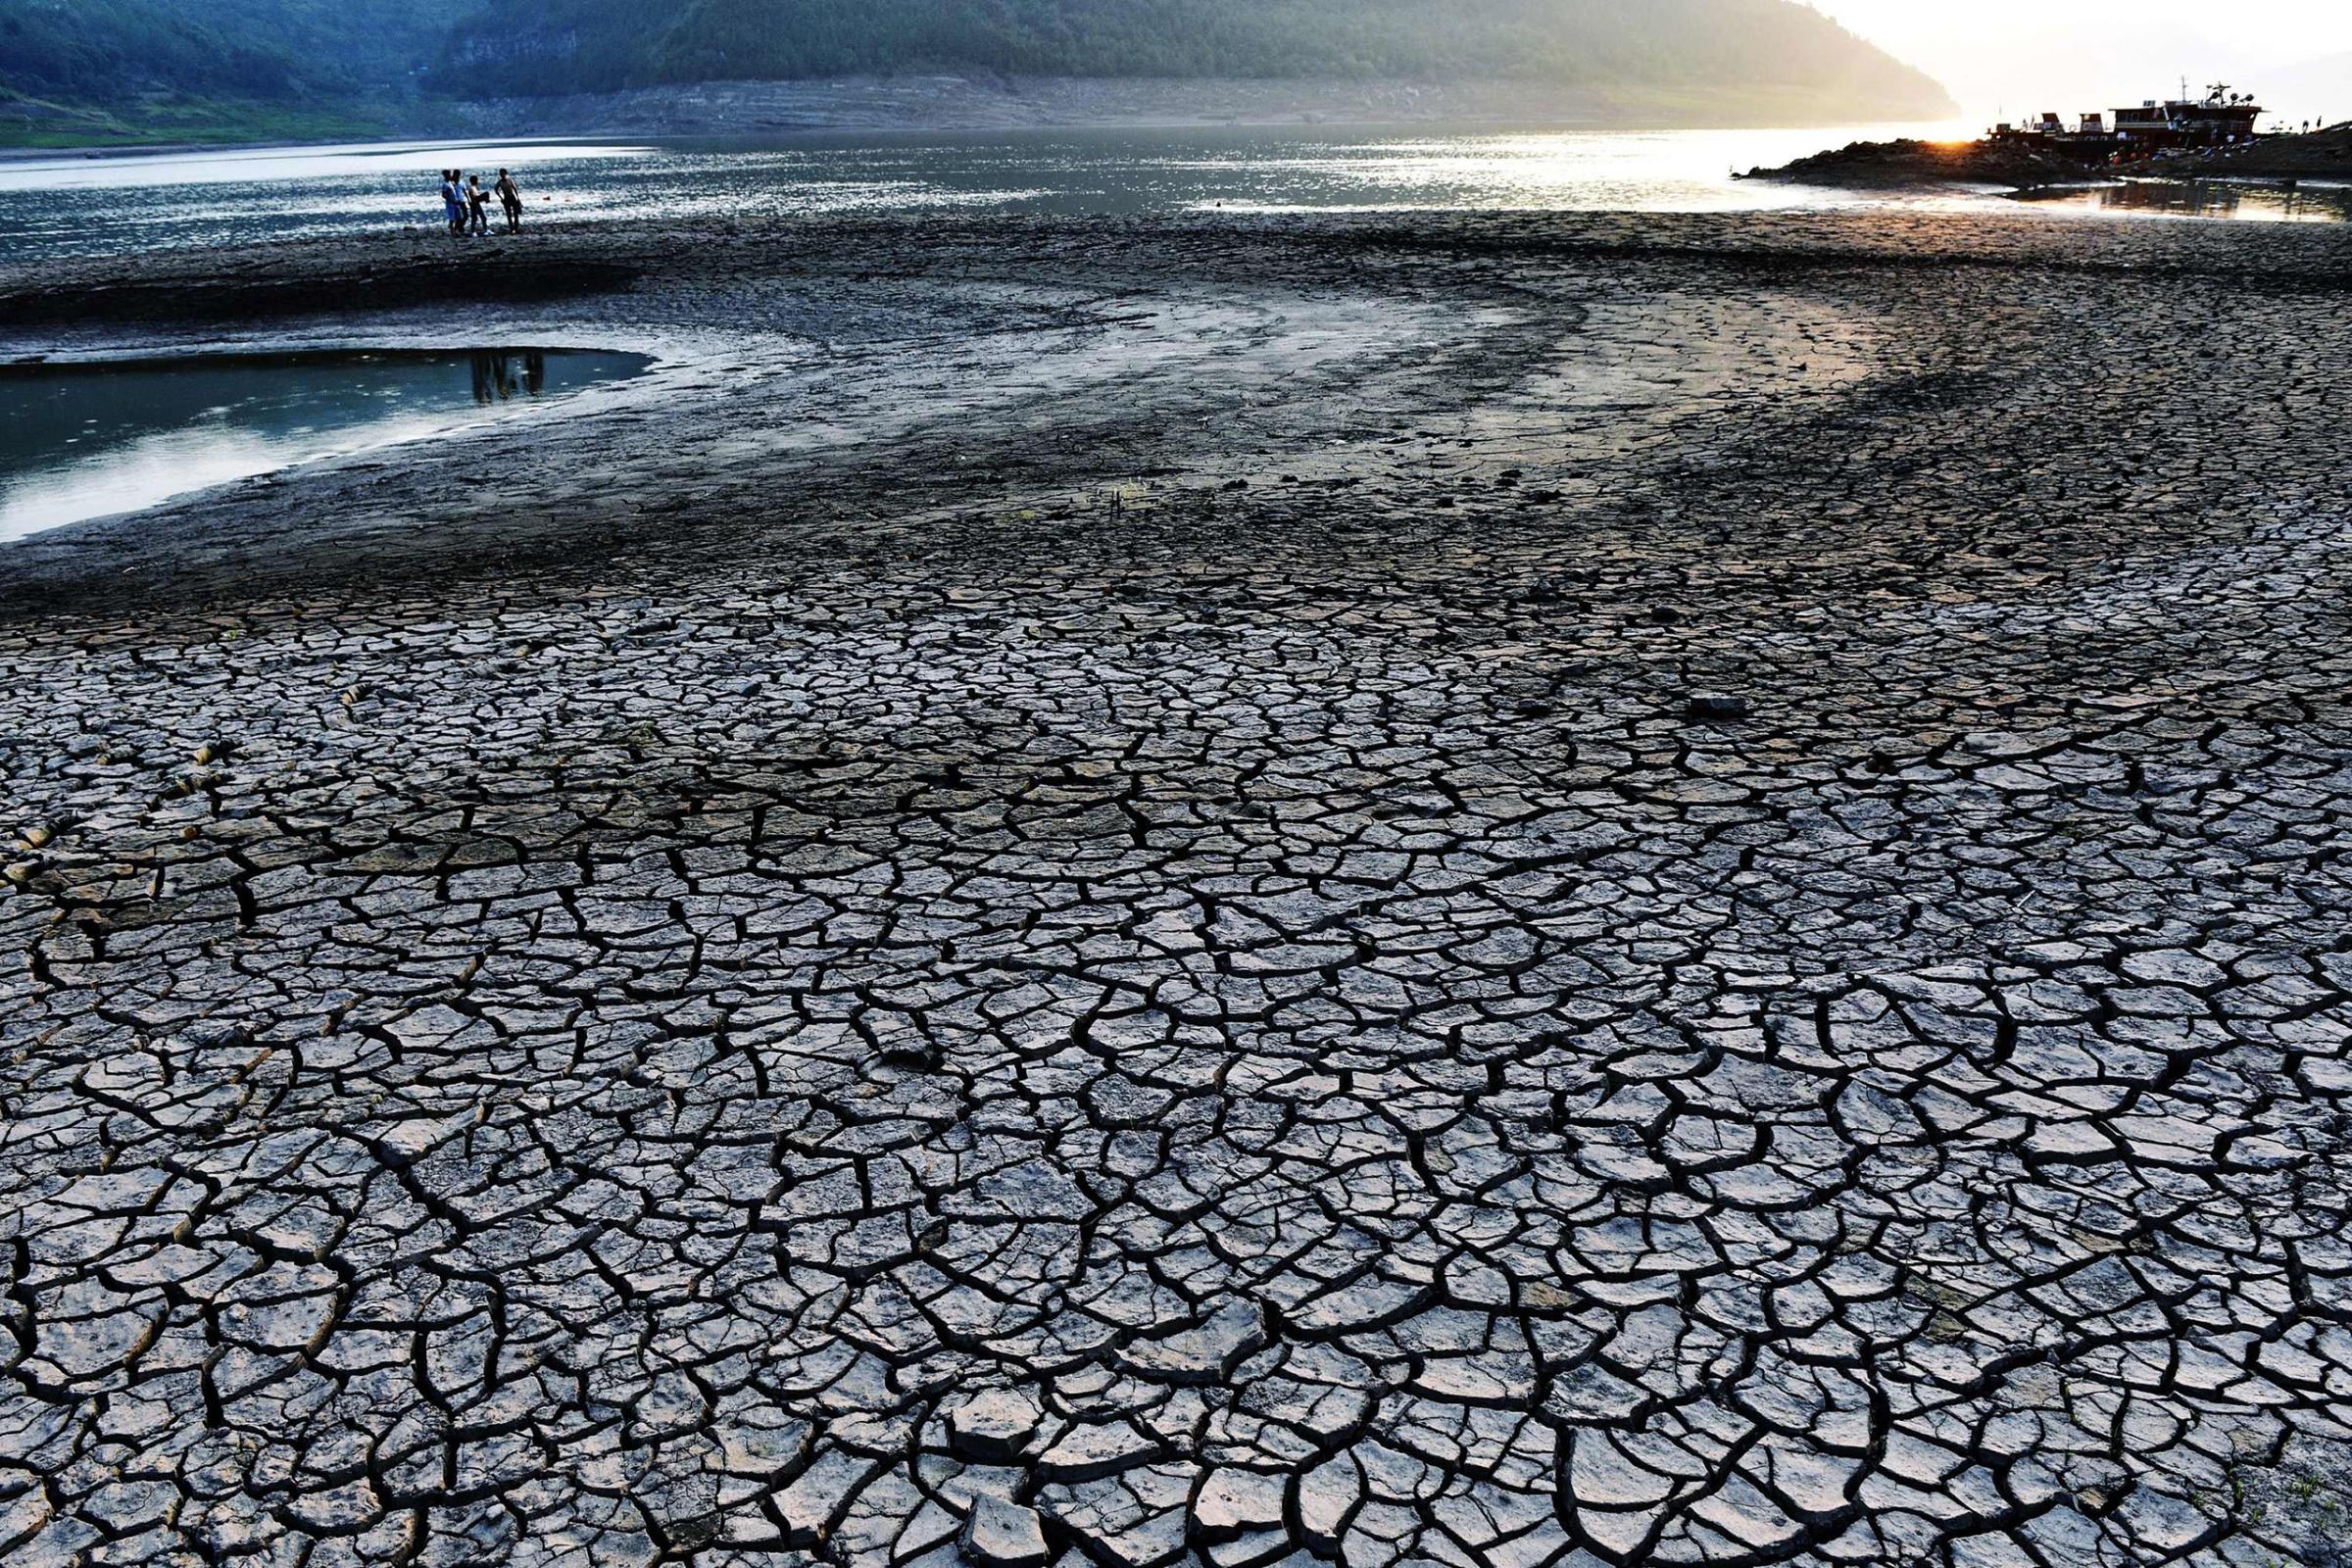 The dried and cracked river beach of the Yangtze River in Yunyang county in Chongqing, China. The Chongqing weather station issued a red alert for high temperatures for 12 consecutive days from Aug. 14 to Aug. 24, 2016.